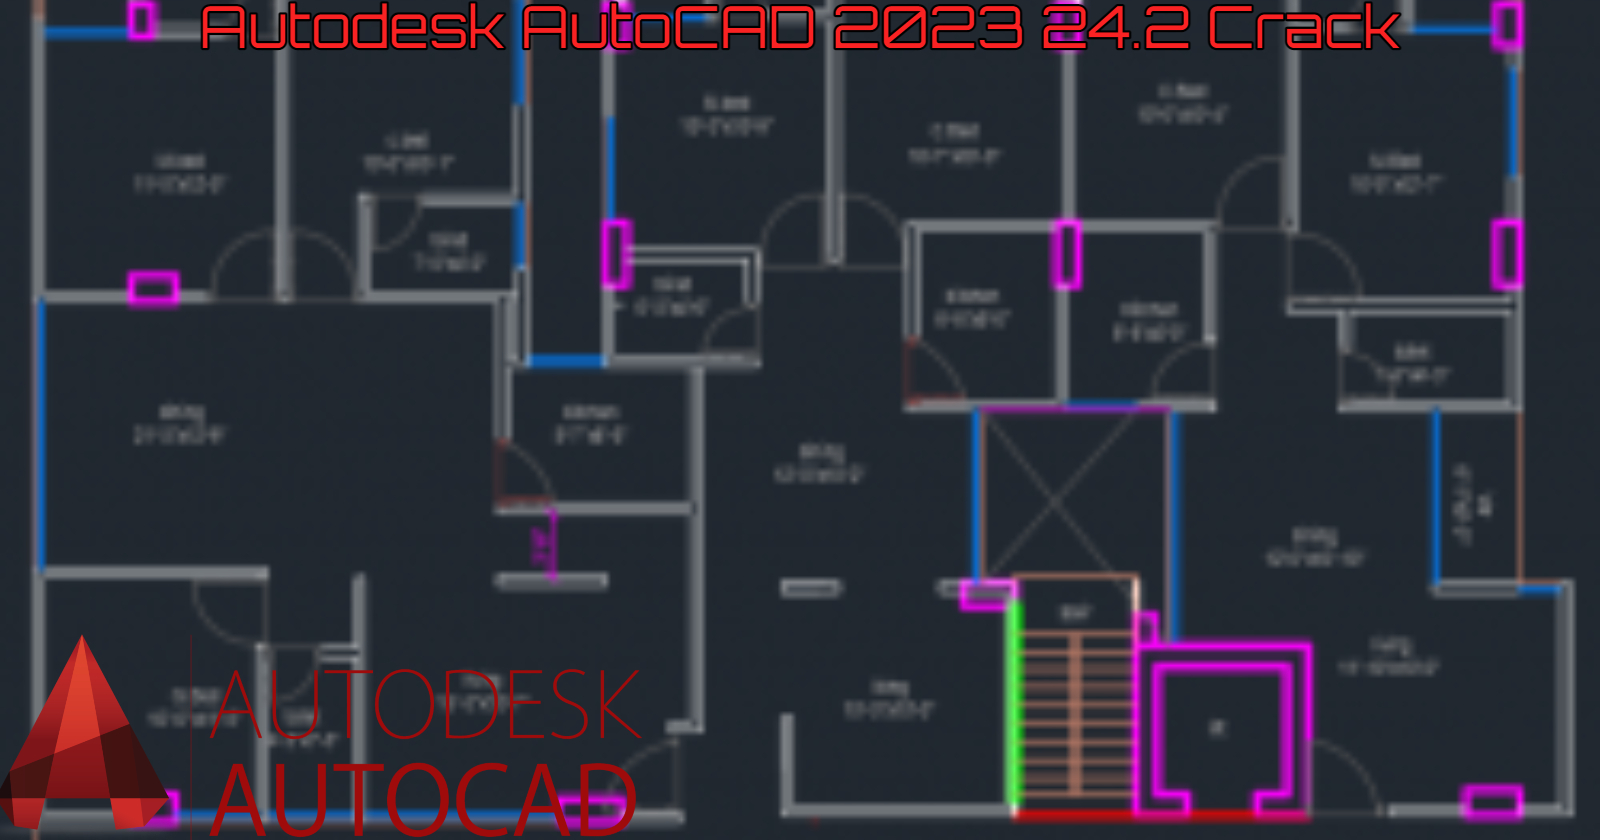 Read more about the article Autodesk AutoCAD 2023 24.2 Crack